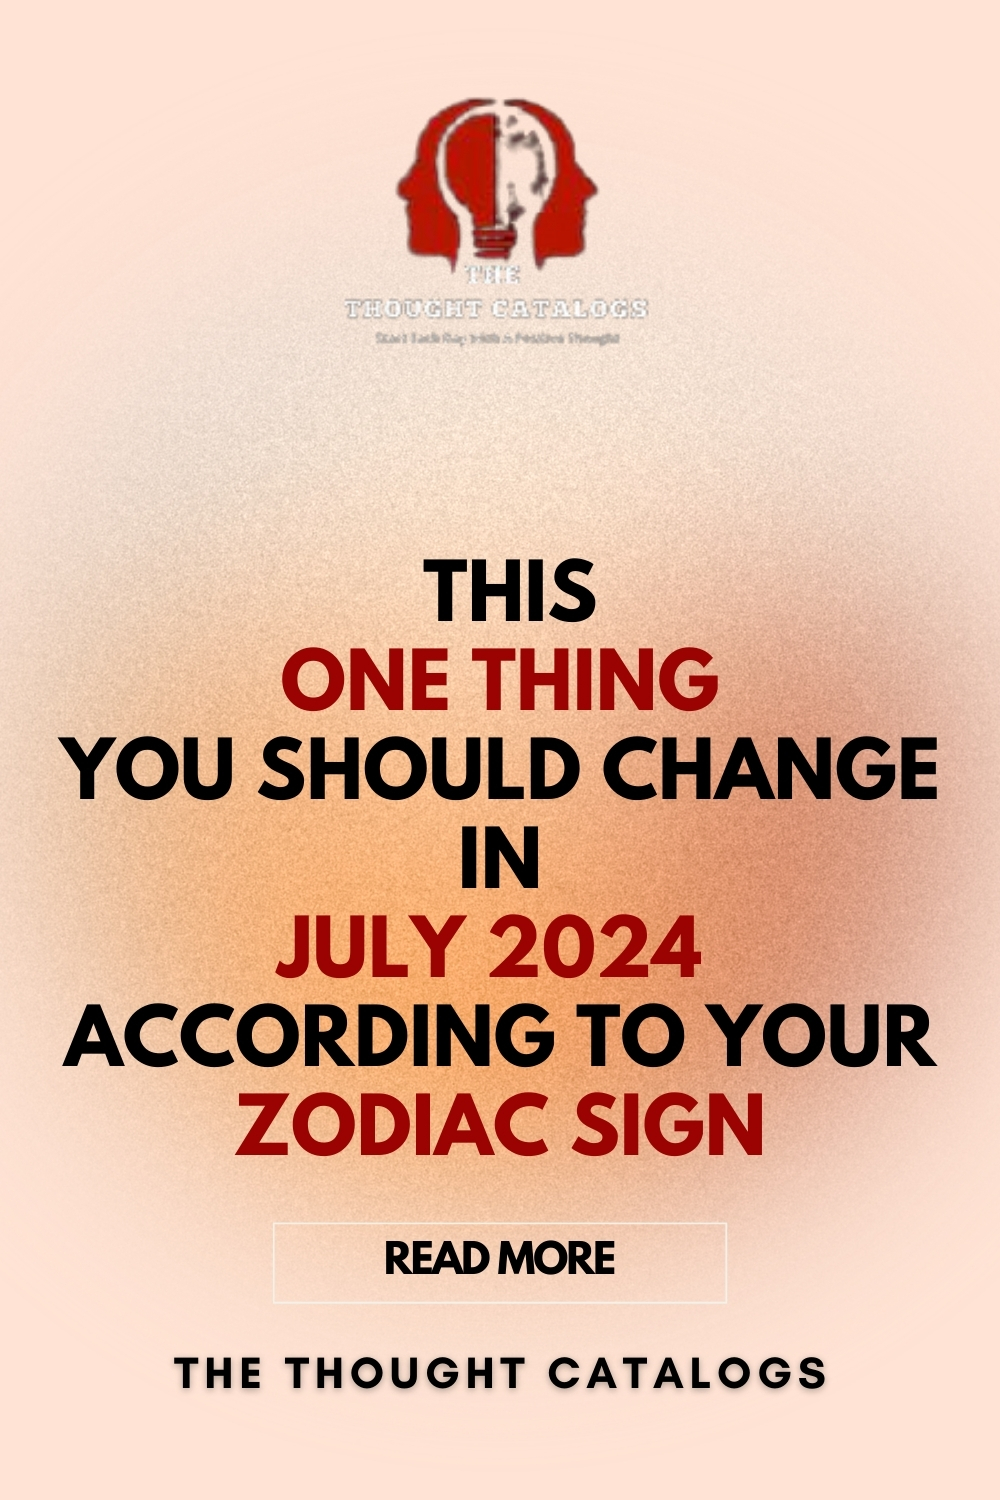 This One Thing You Should Change In July 2024, According To Your Zodiac Sign